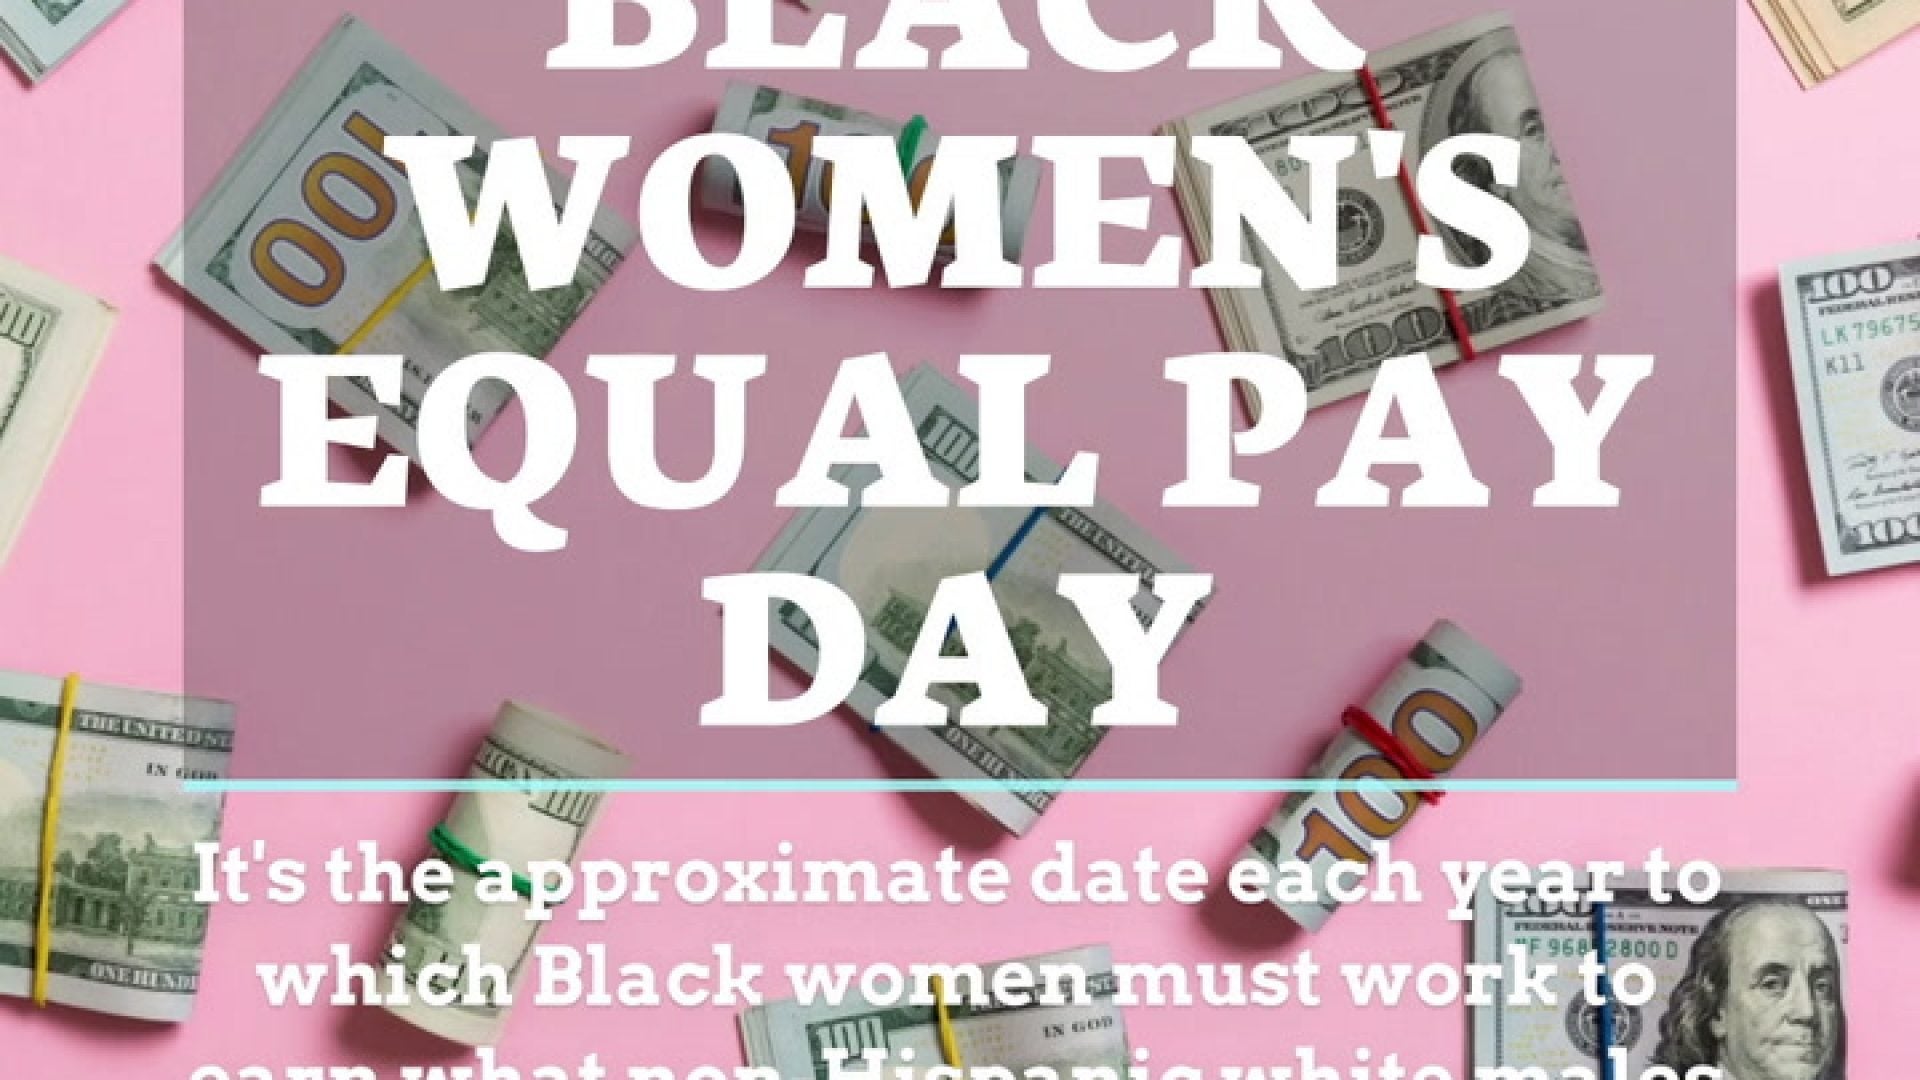 7 Tips From Boss Black Women for Equal Pay Day